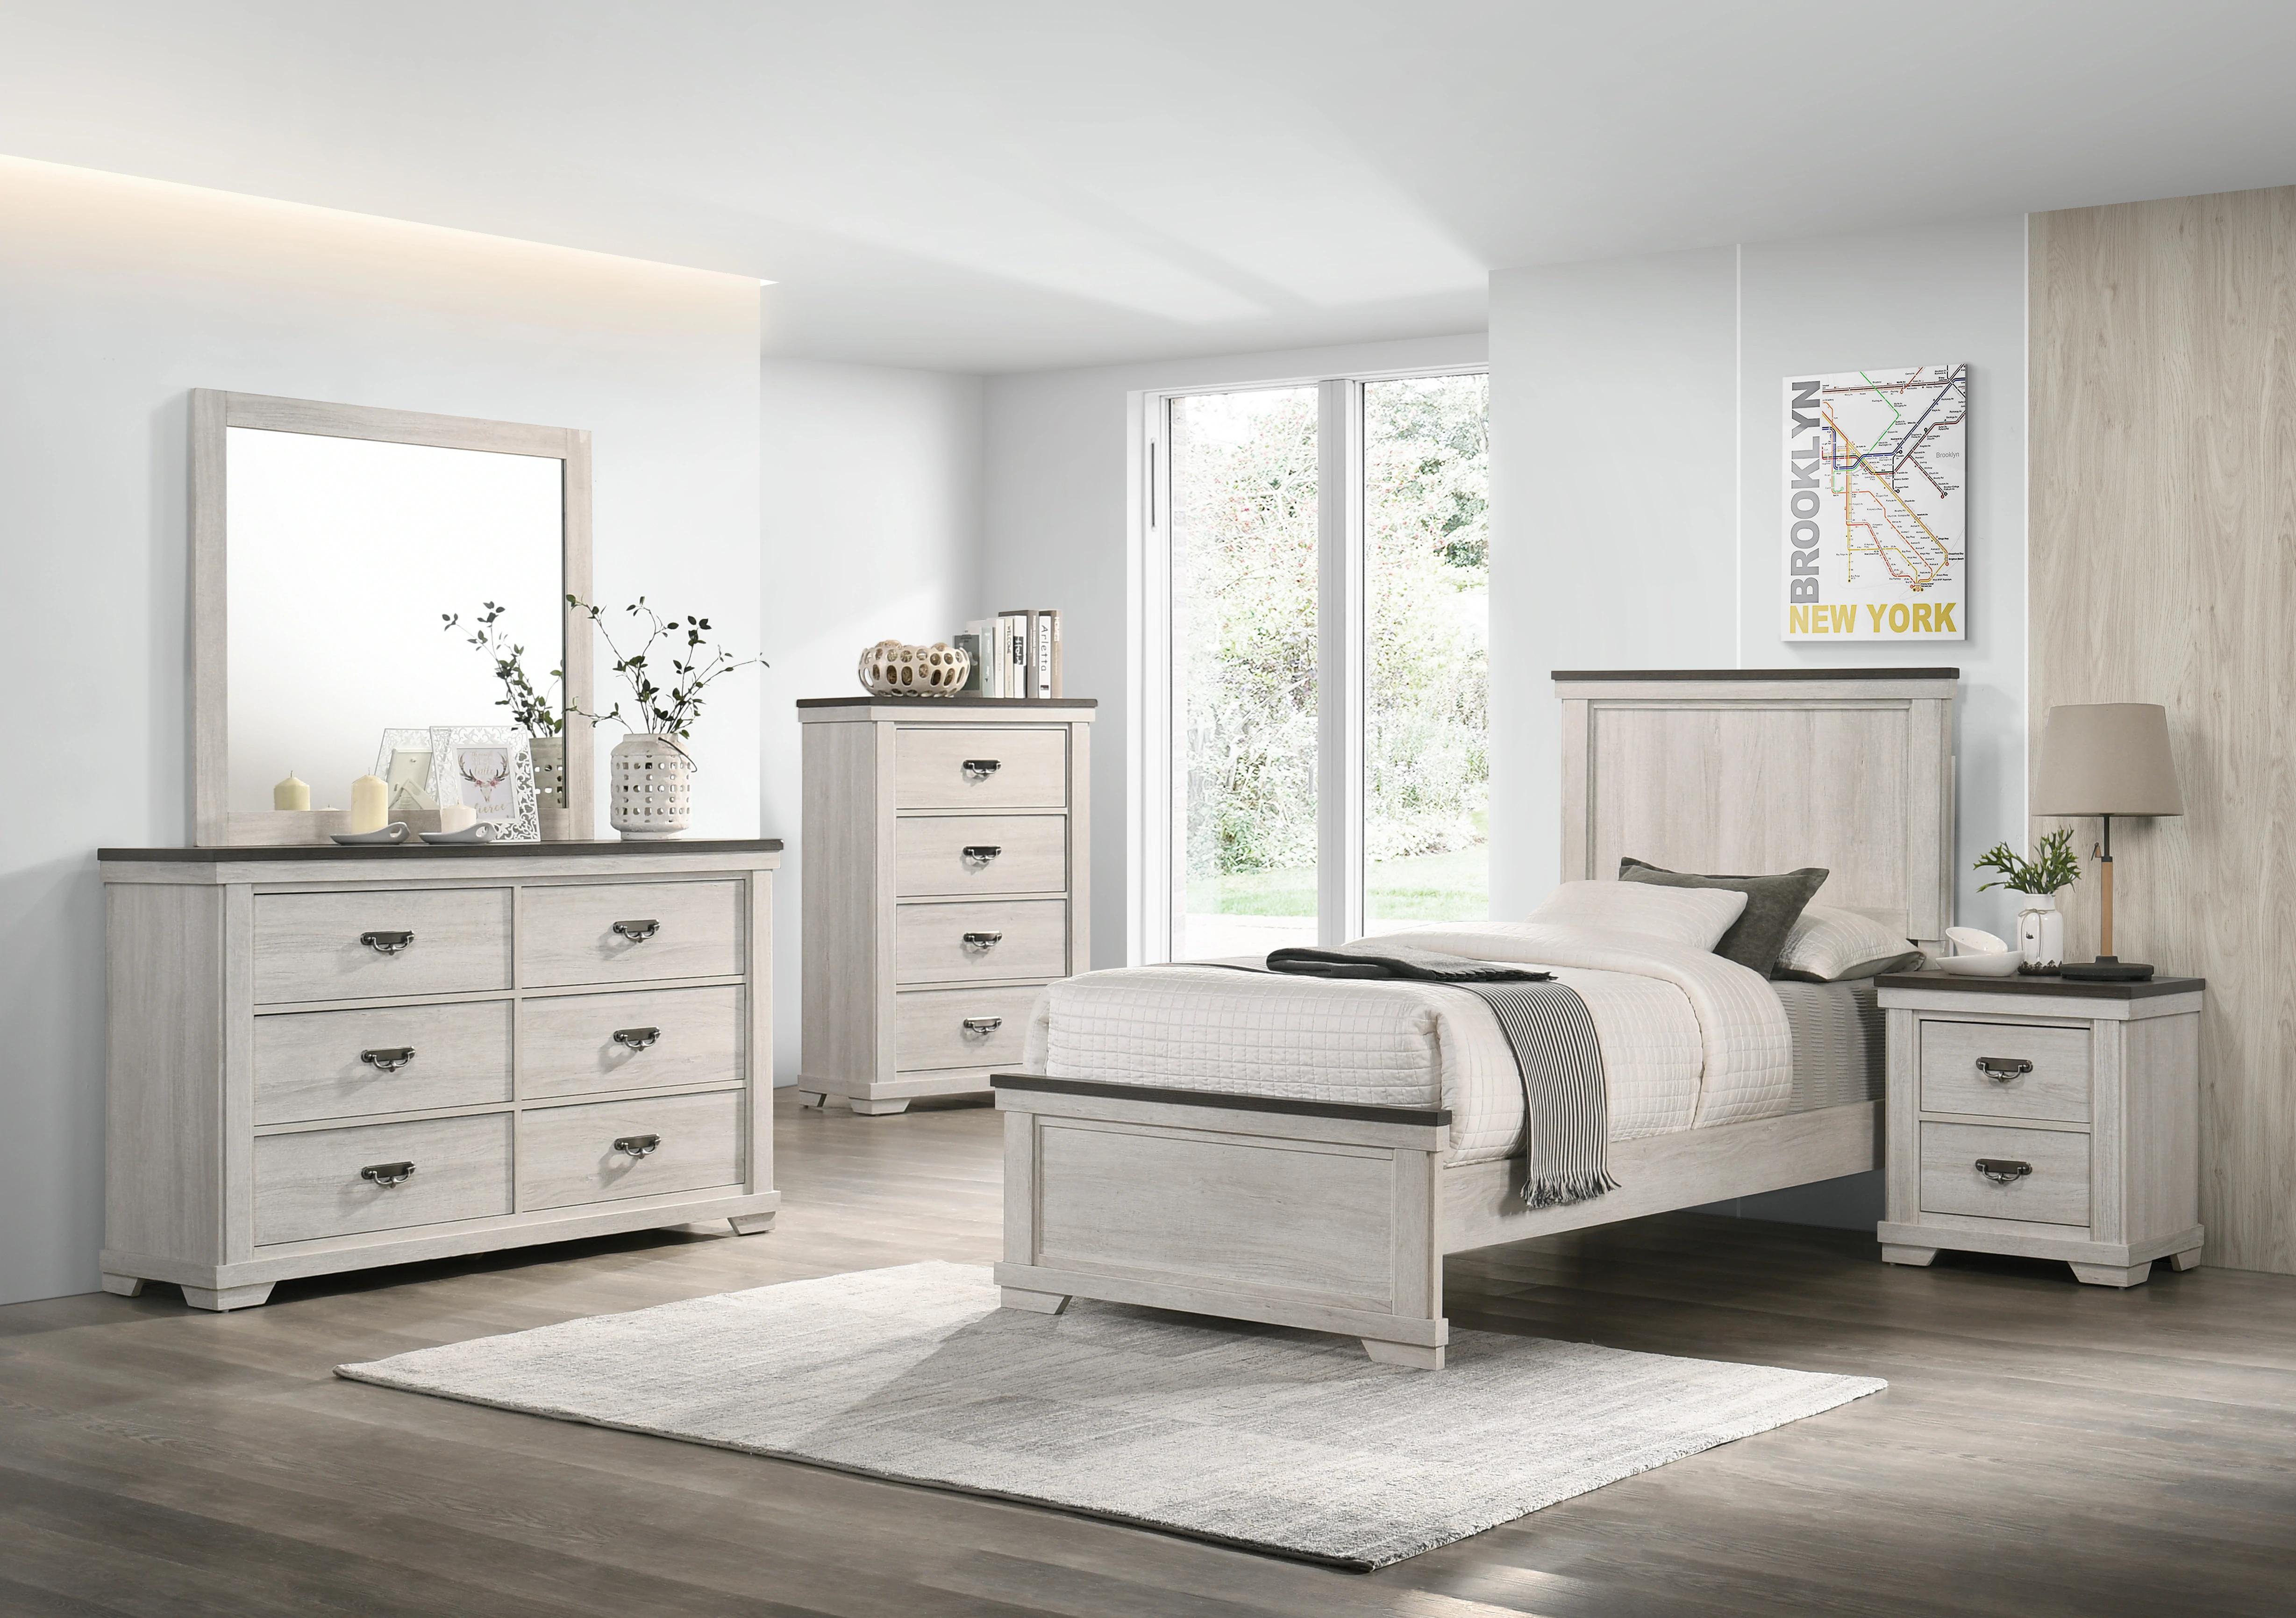 Rustic, Farmhouse Panel Bedroom Set Leighton B8180-T-Bed-6pcs in Antique White 